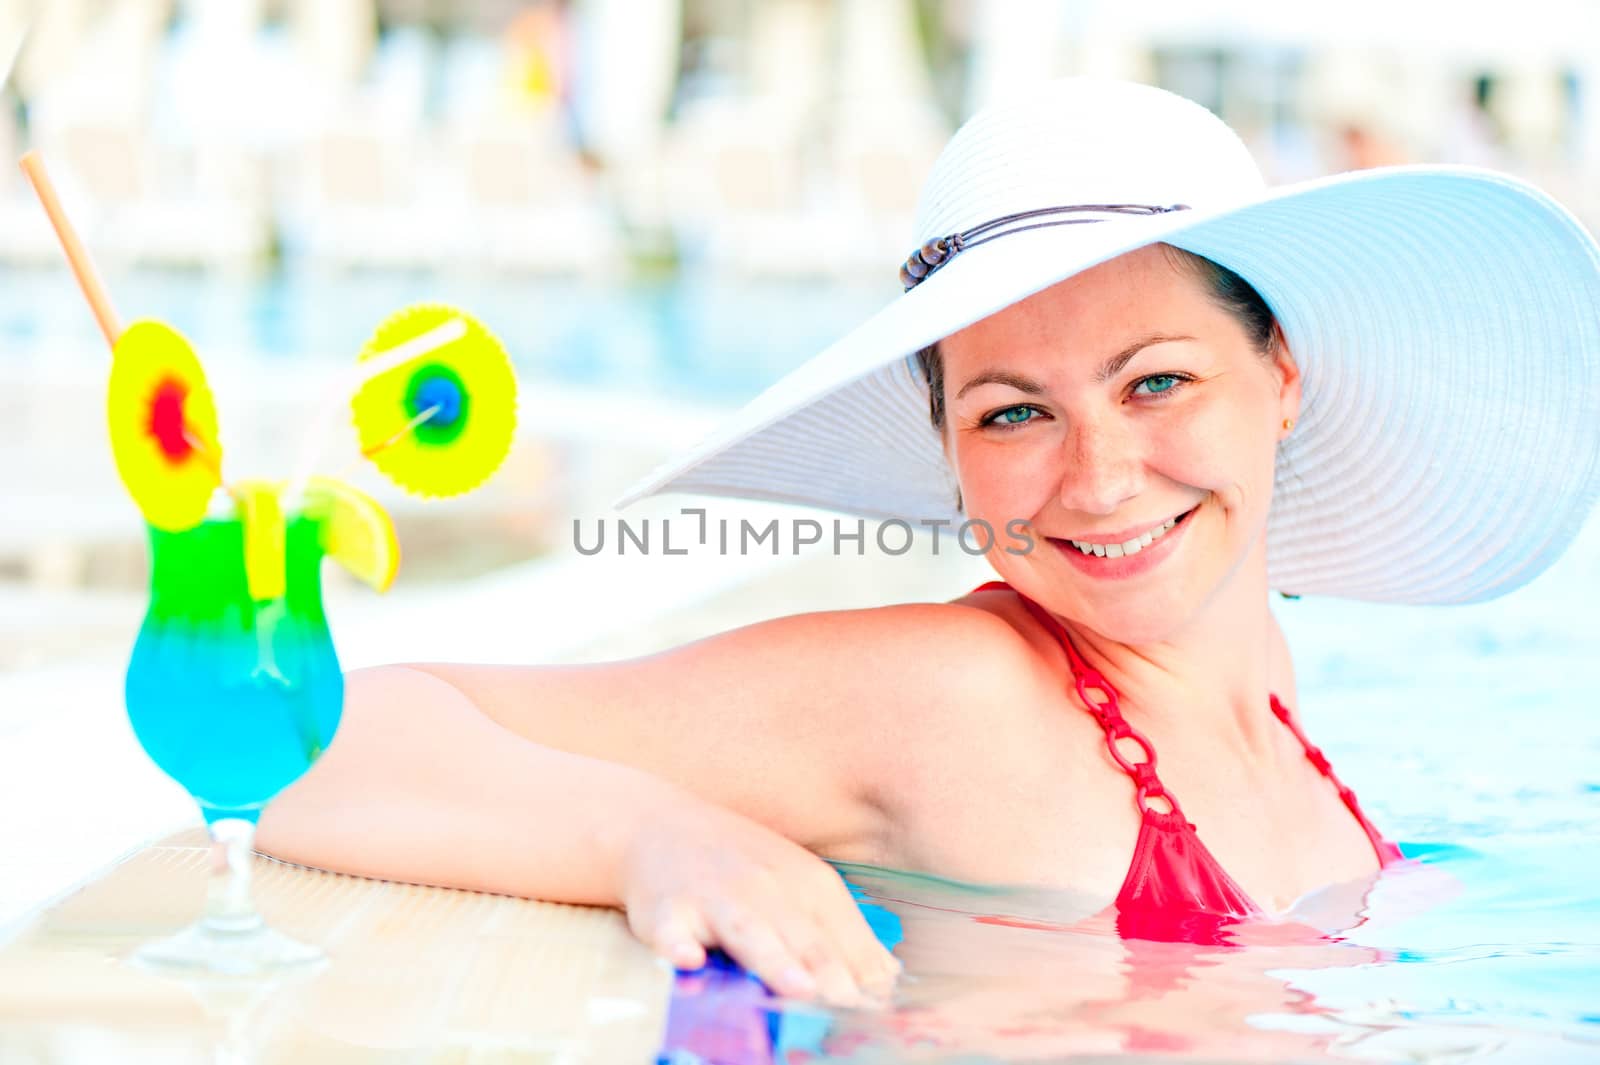 girl in the pool in a white hat smiling by kosmsos111